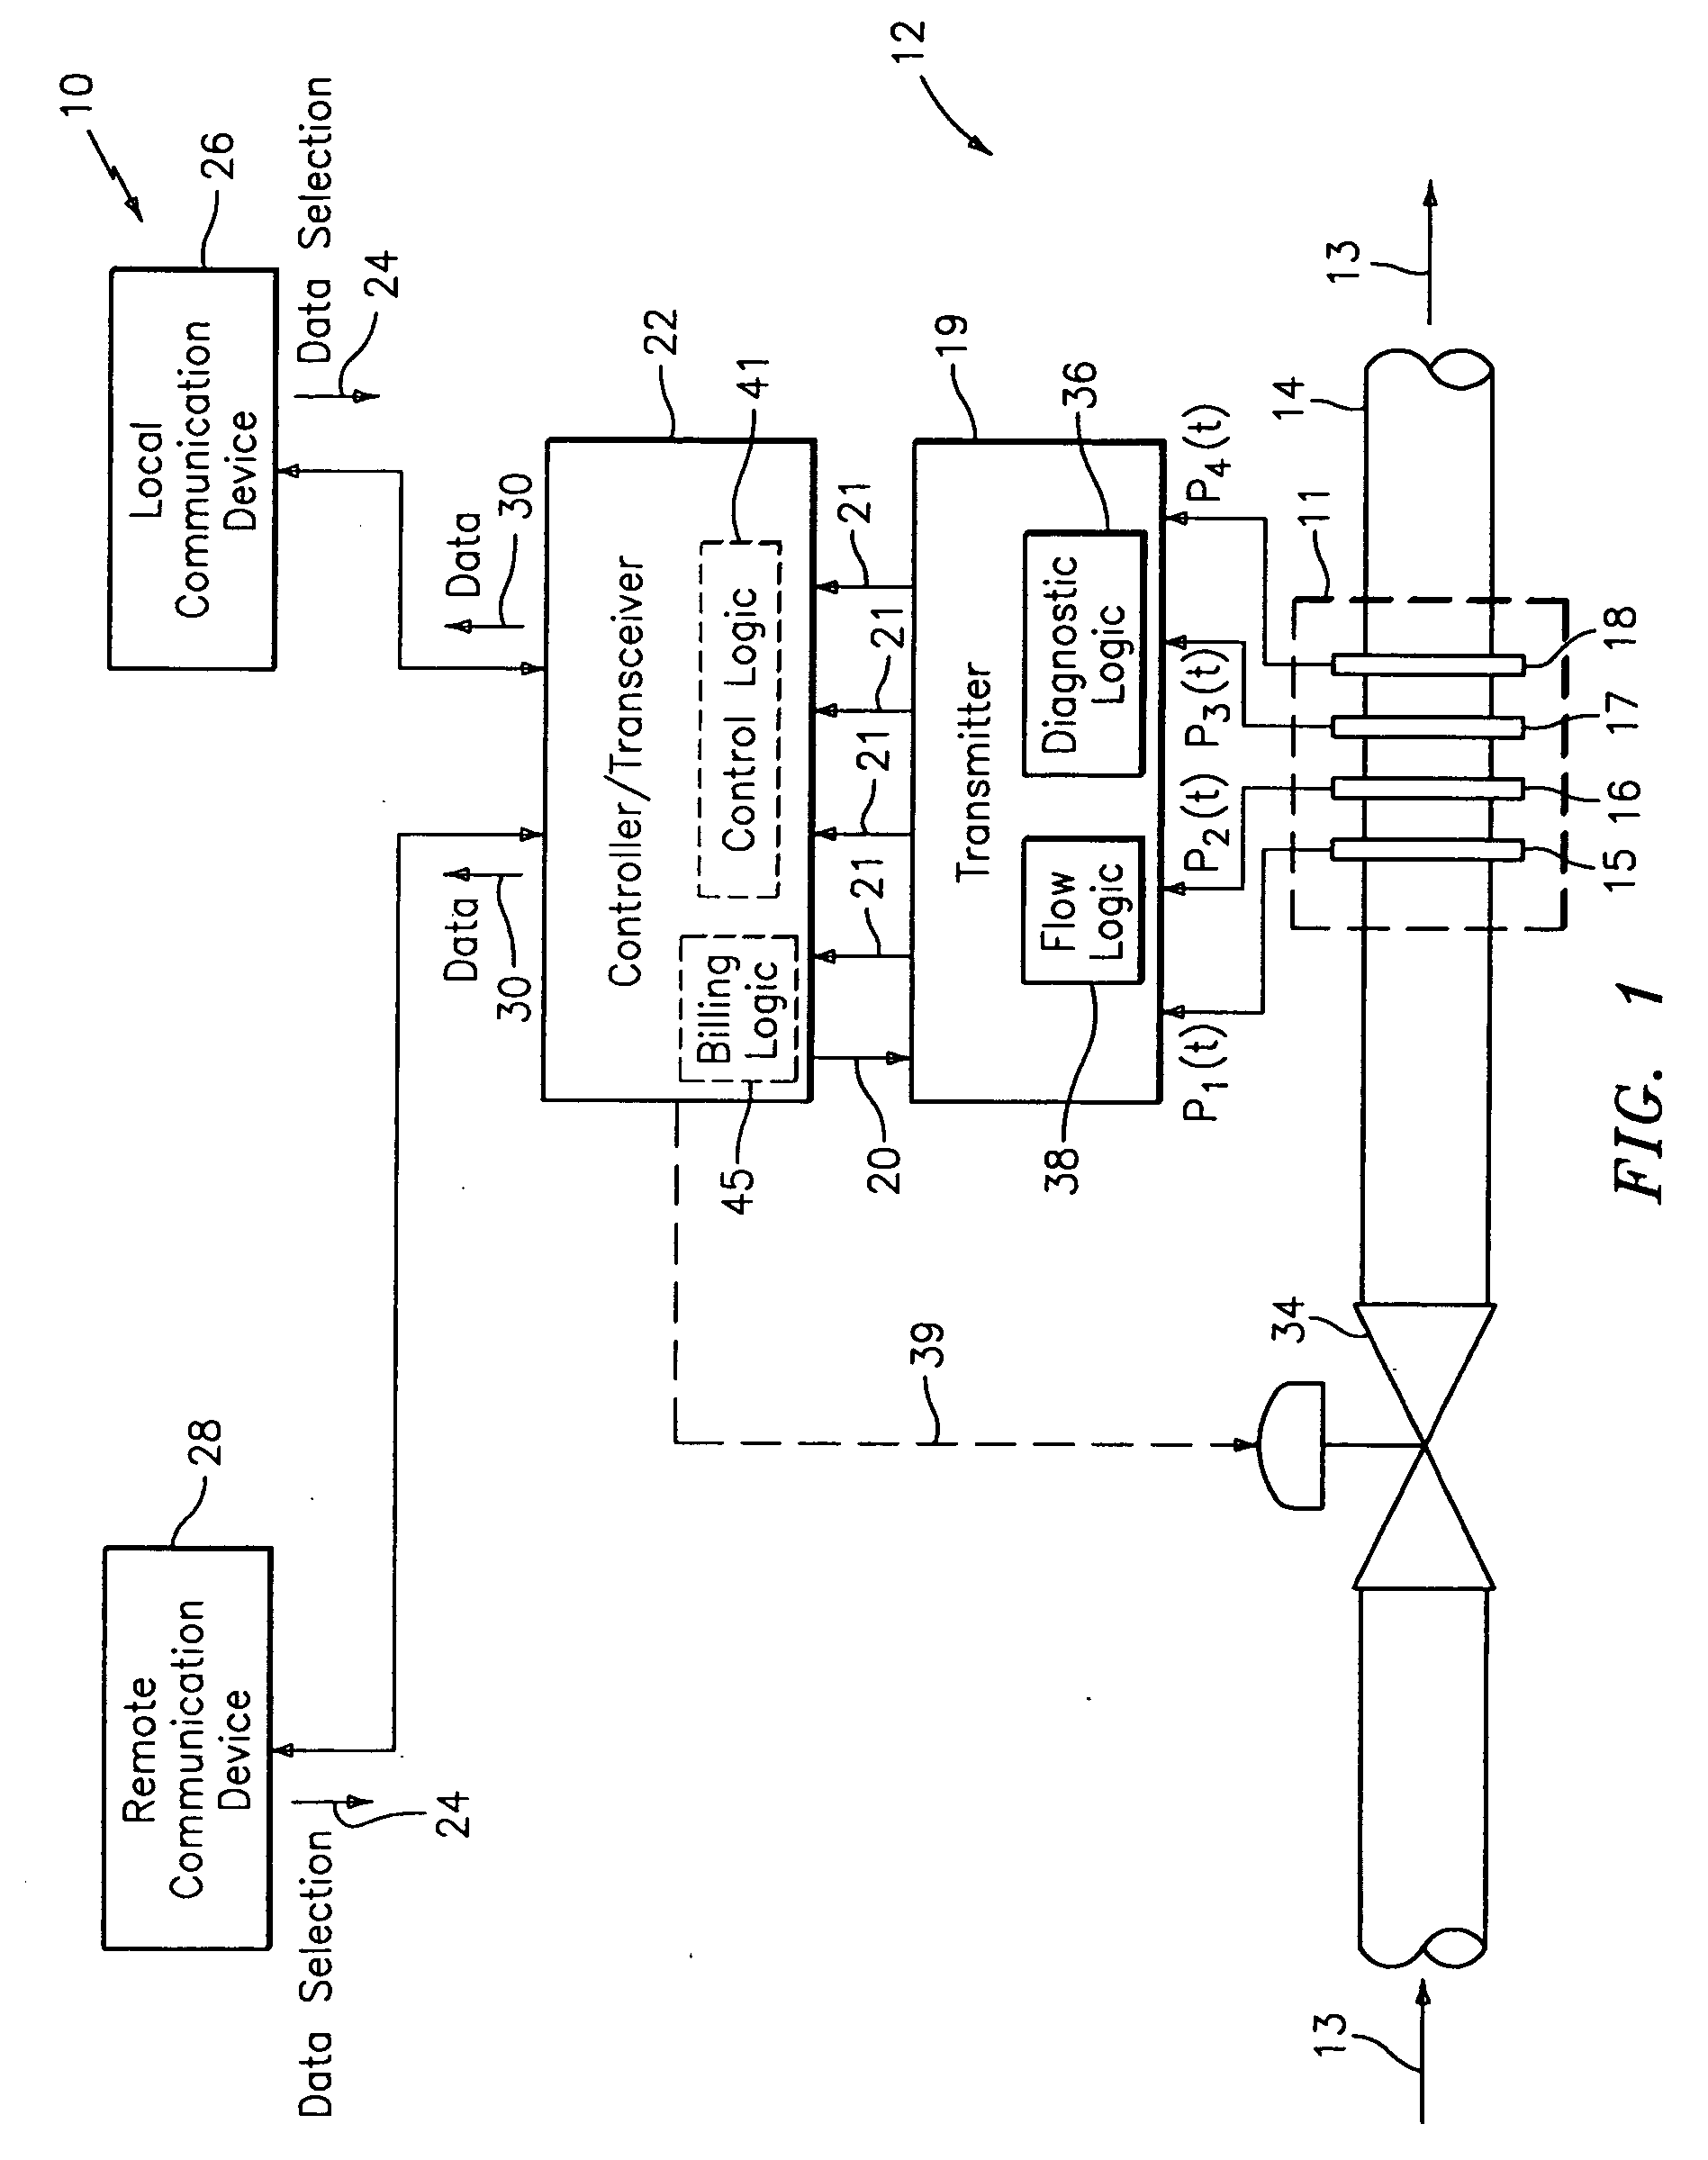 System of distributed configurable flowmeters